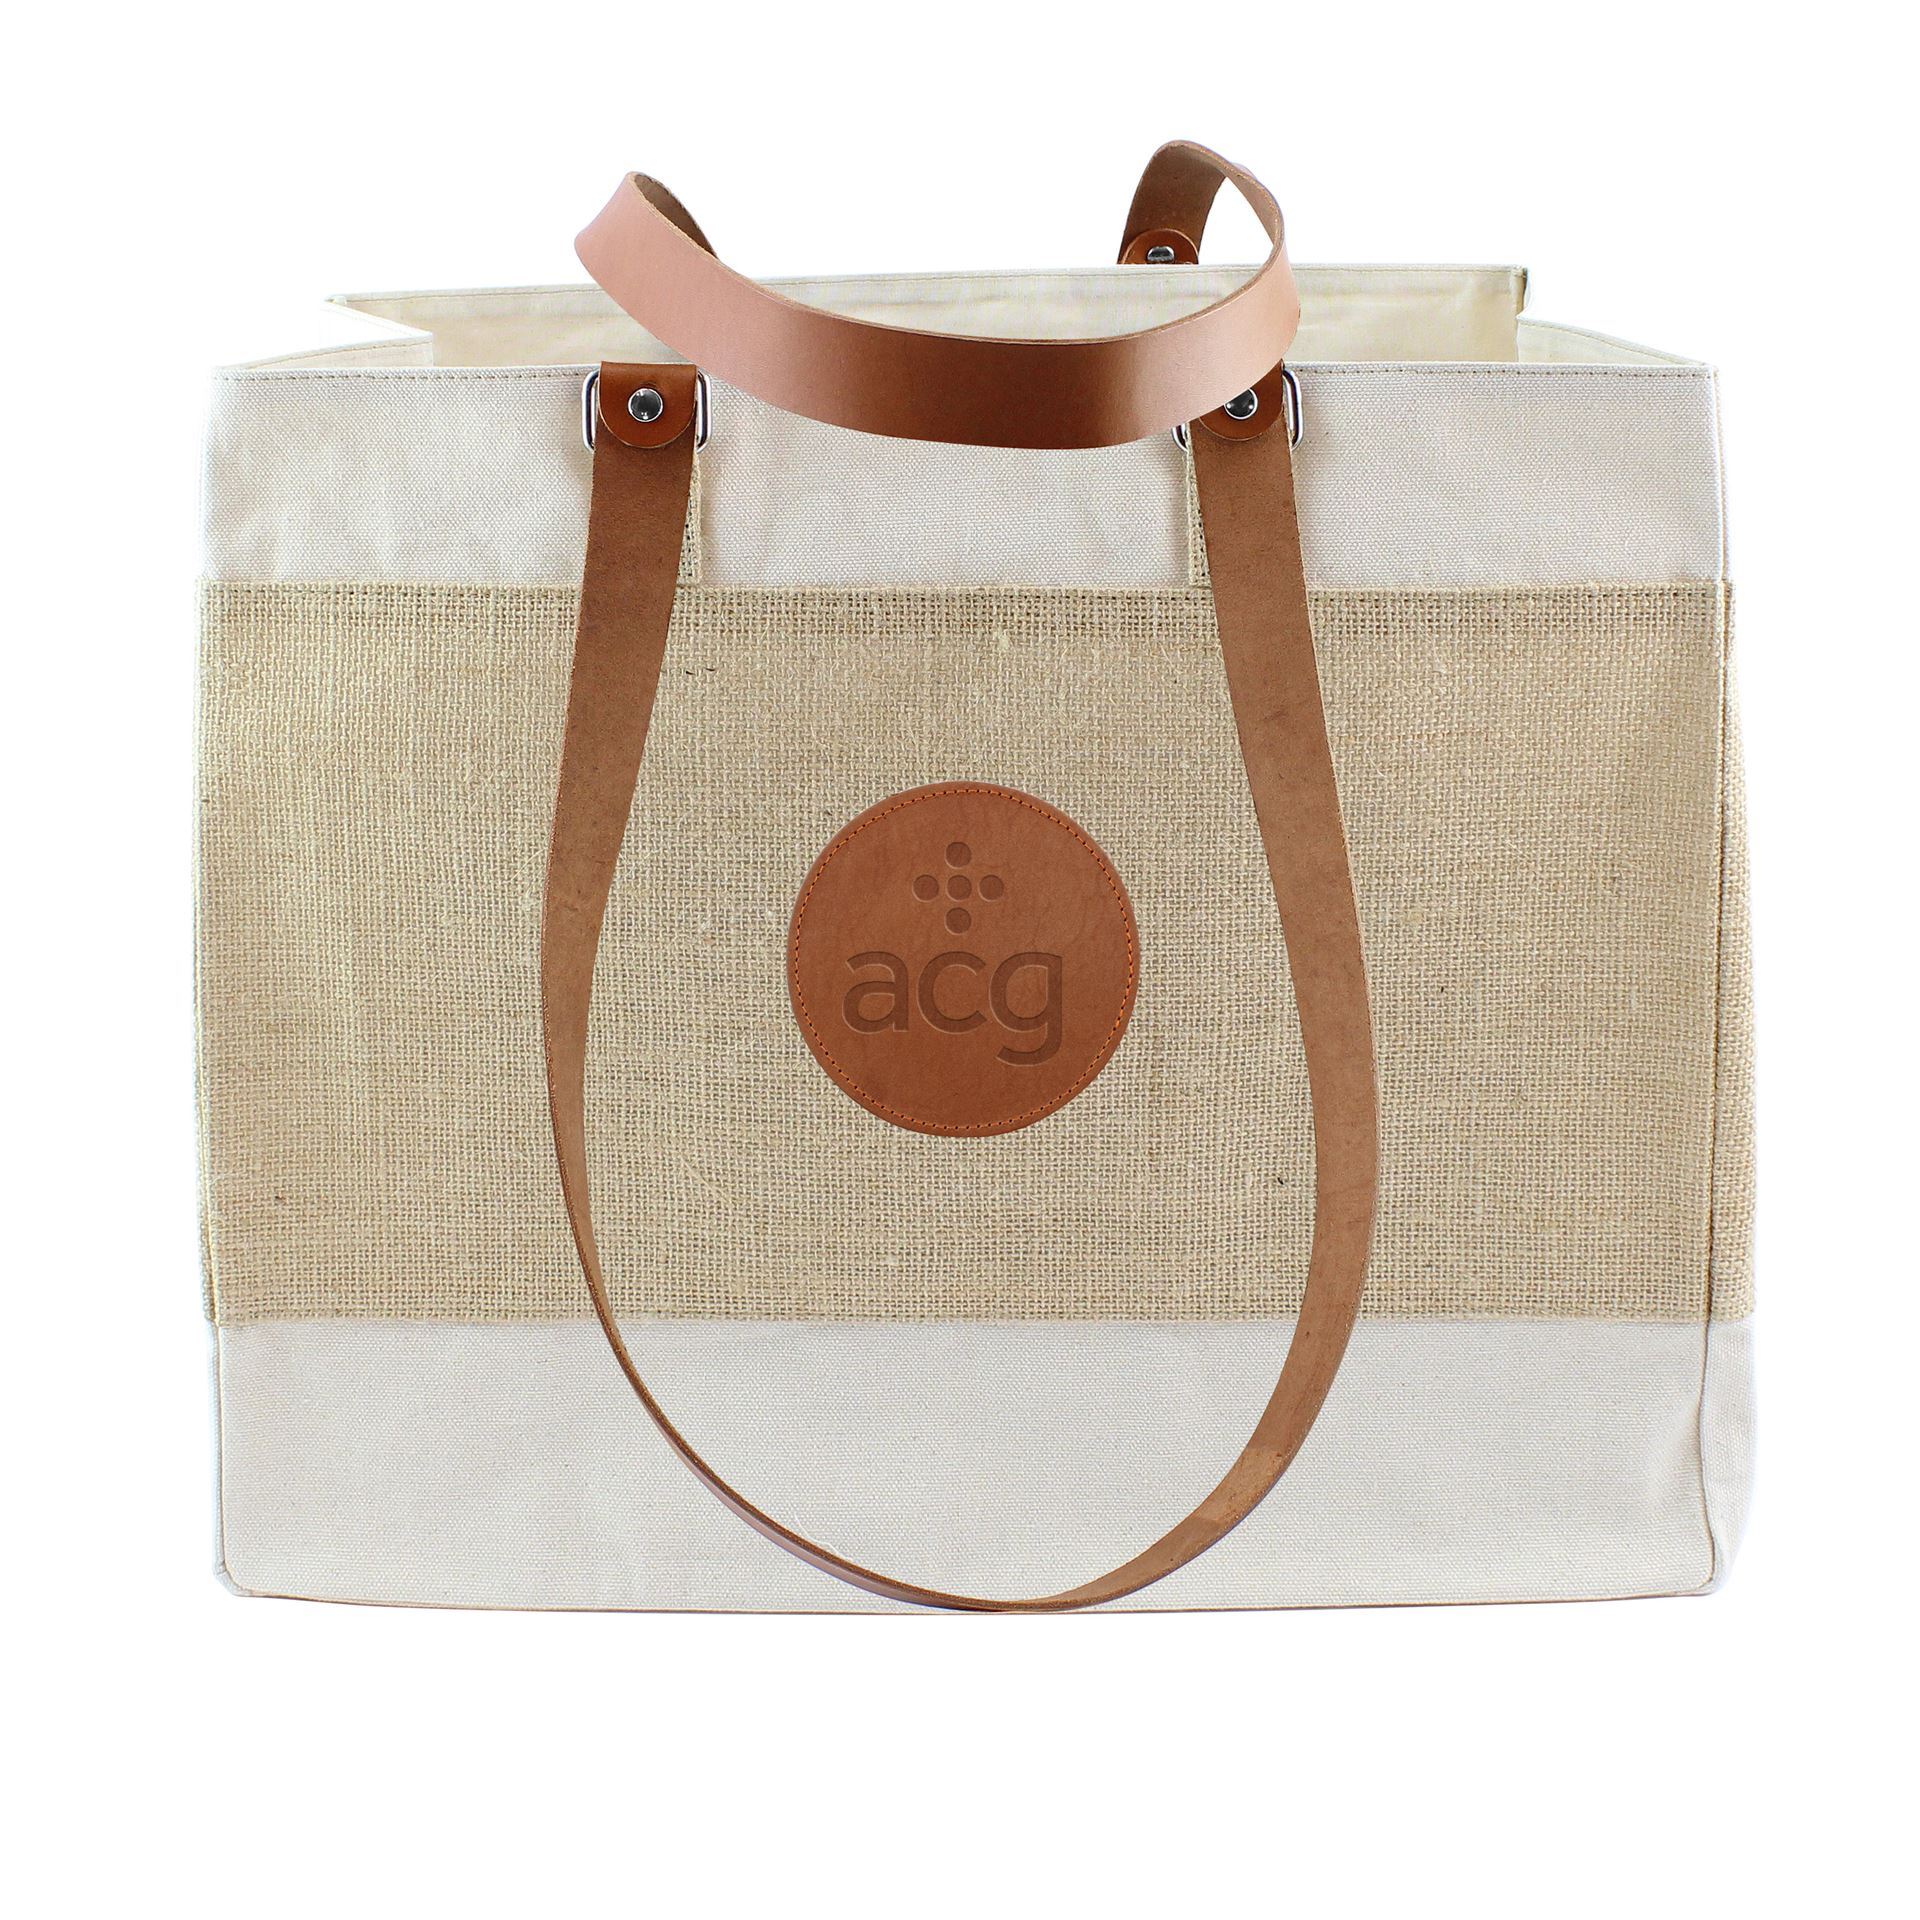 Deluxe Jute & Cotton Tote Bag with Chelsea Leather Handles